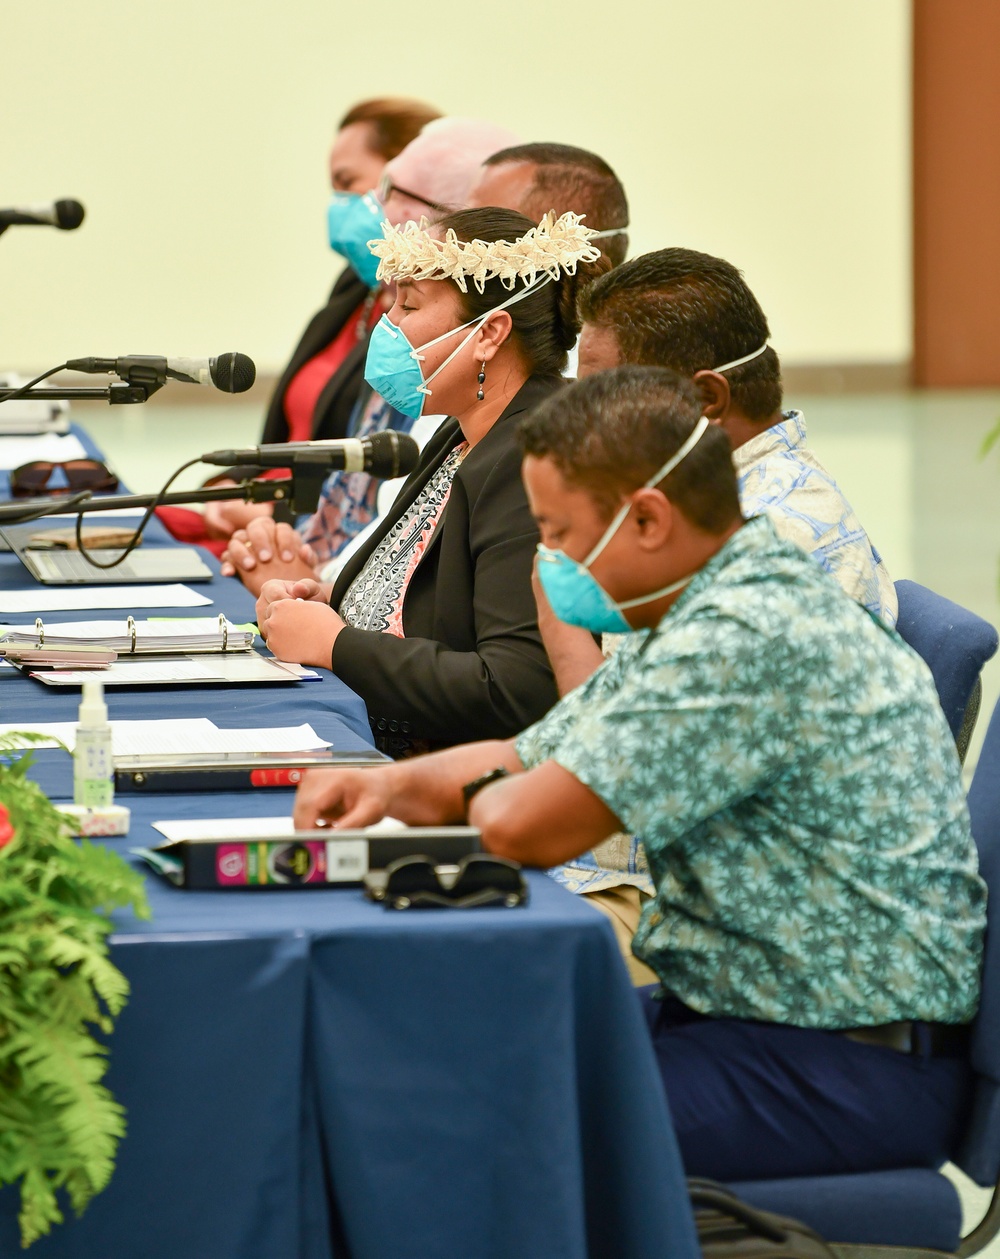 Delegations Begin First Round of Discussions For Compact of Free Association on Kwajalein Atoll